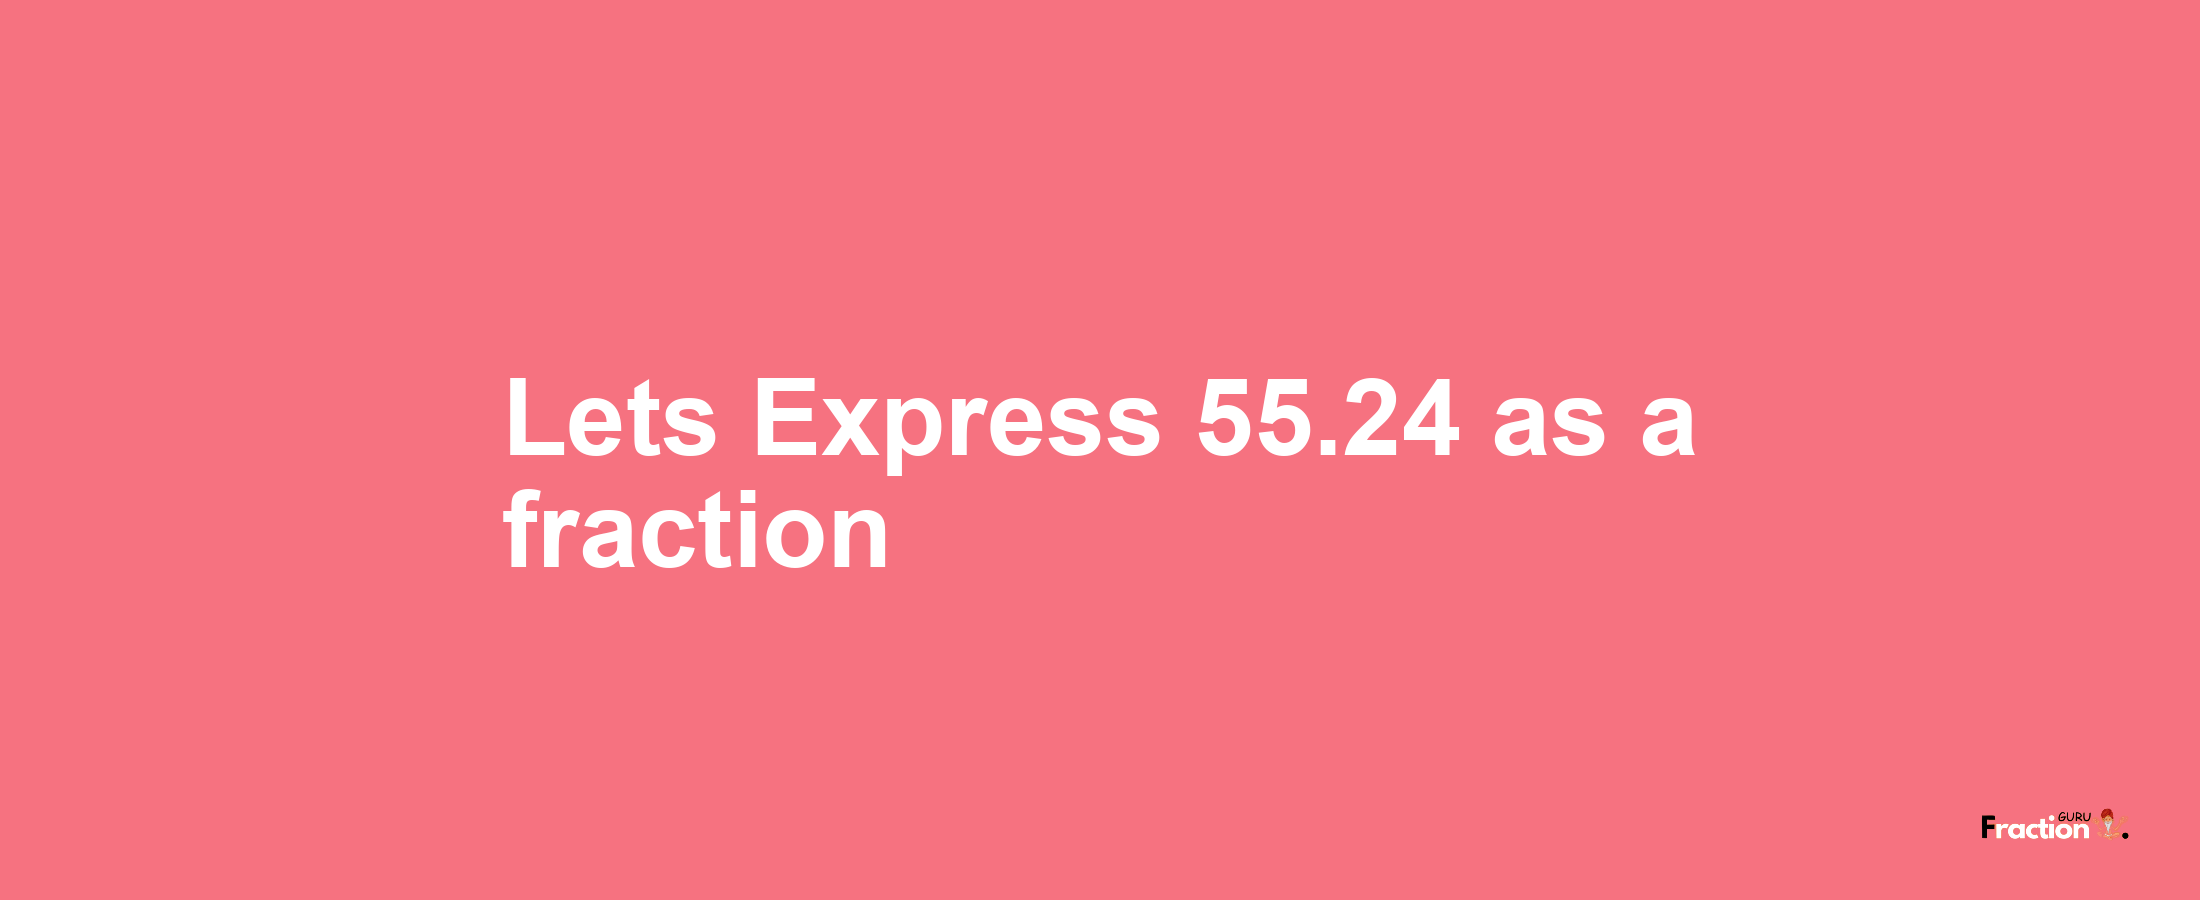 Lets Express 55.24 as afraction